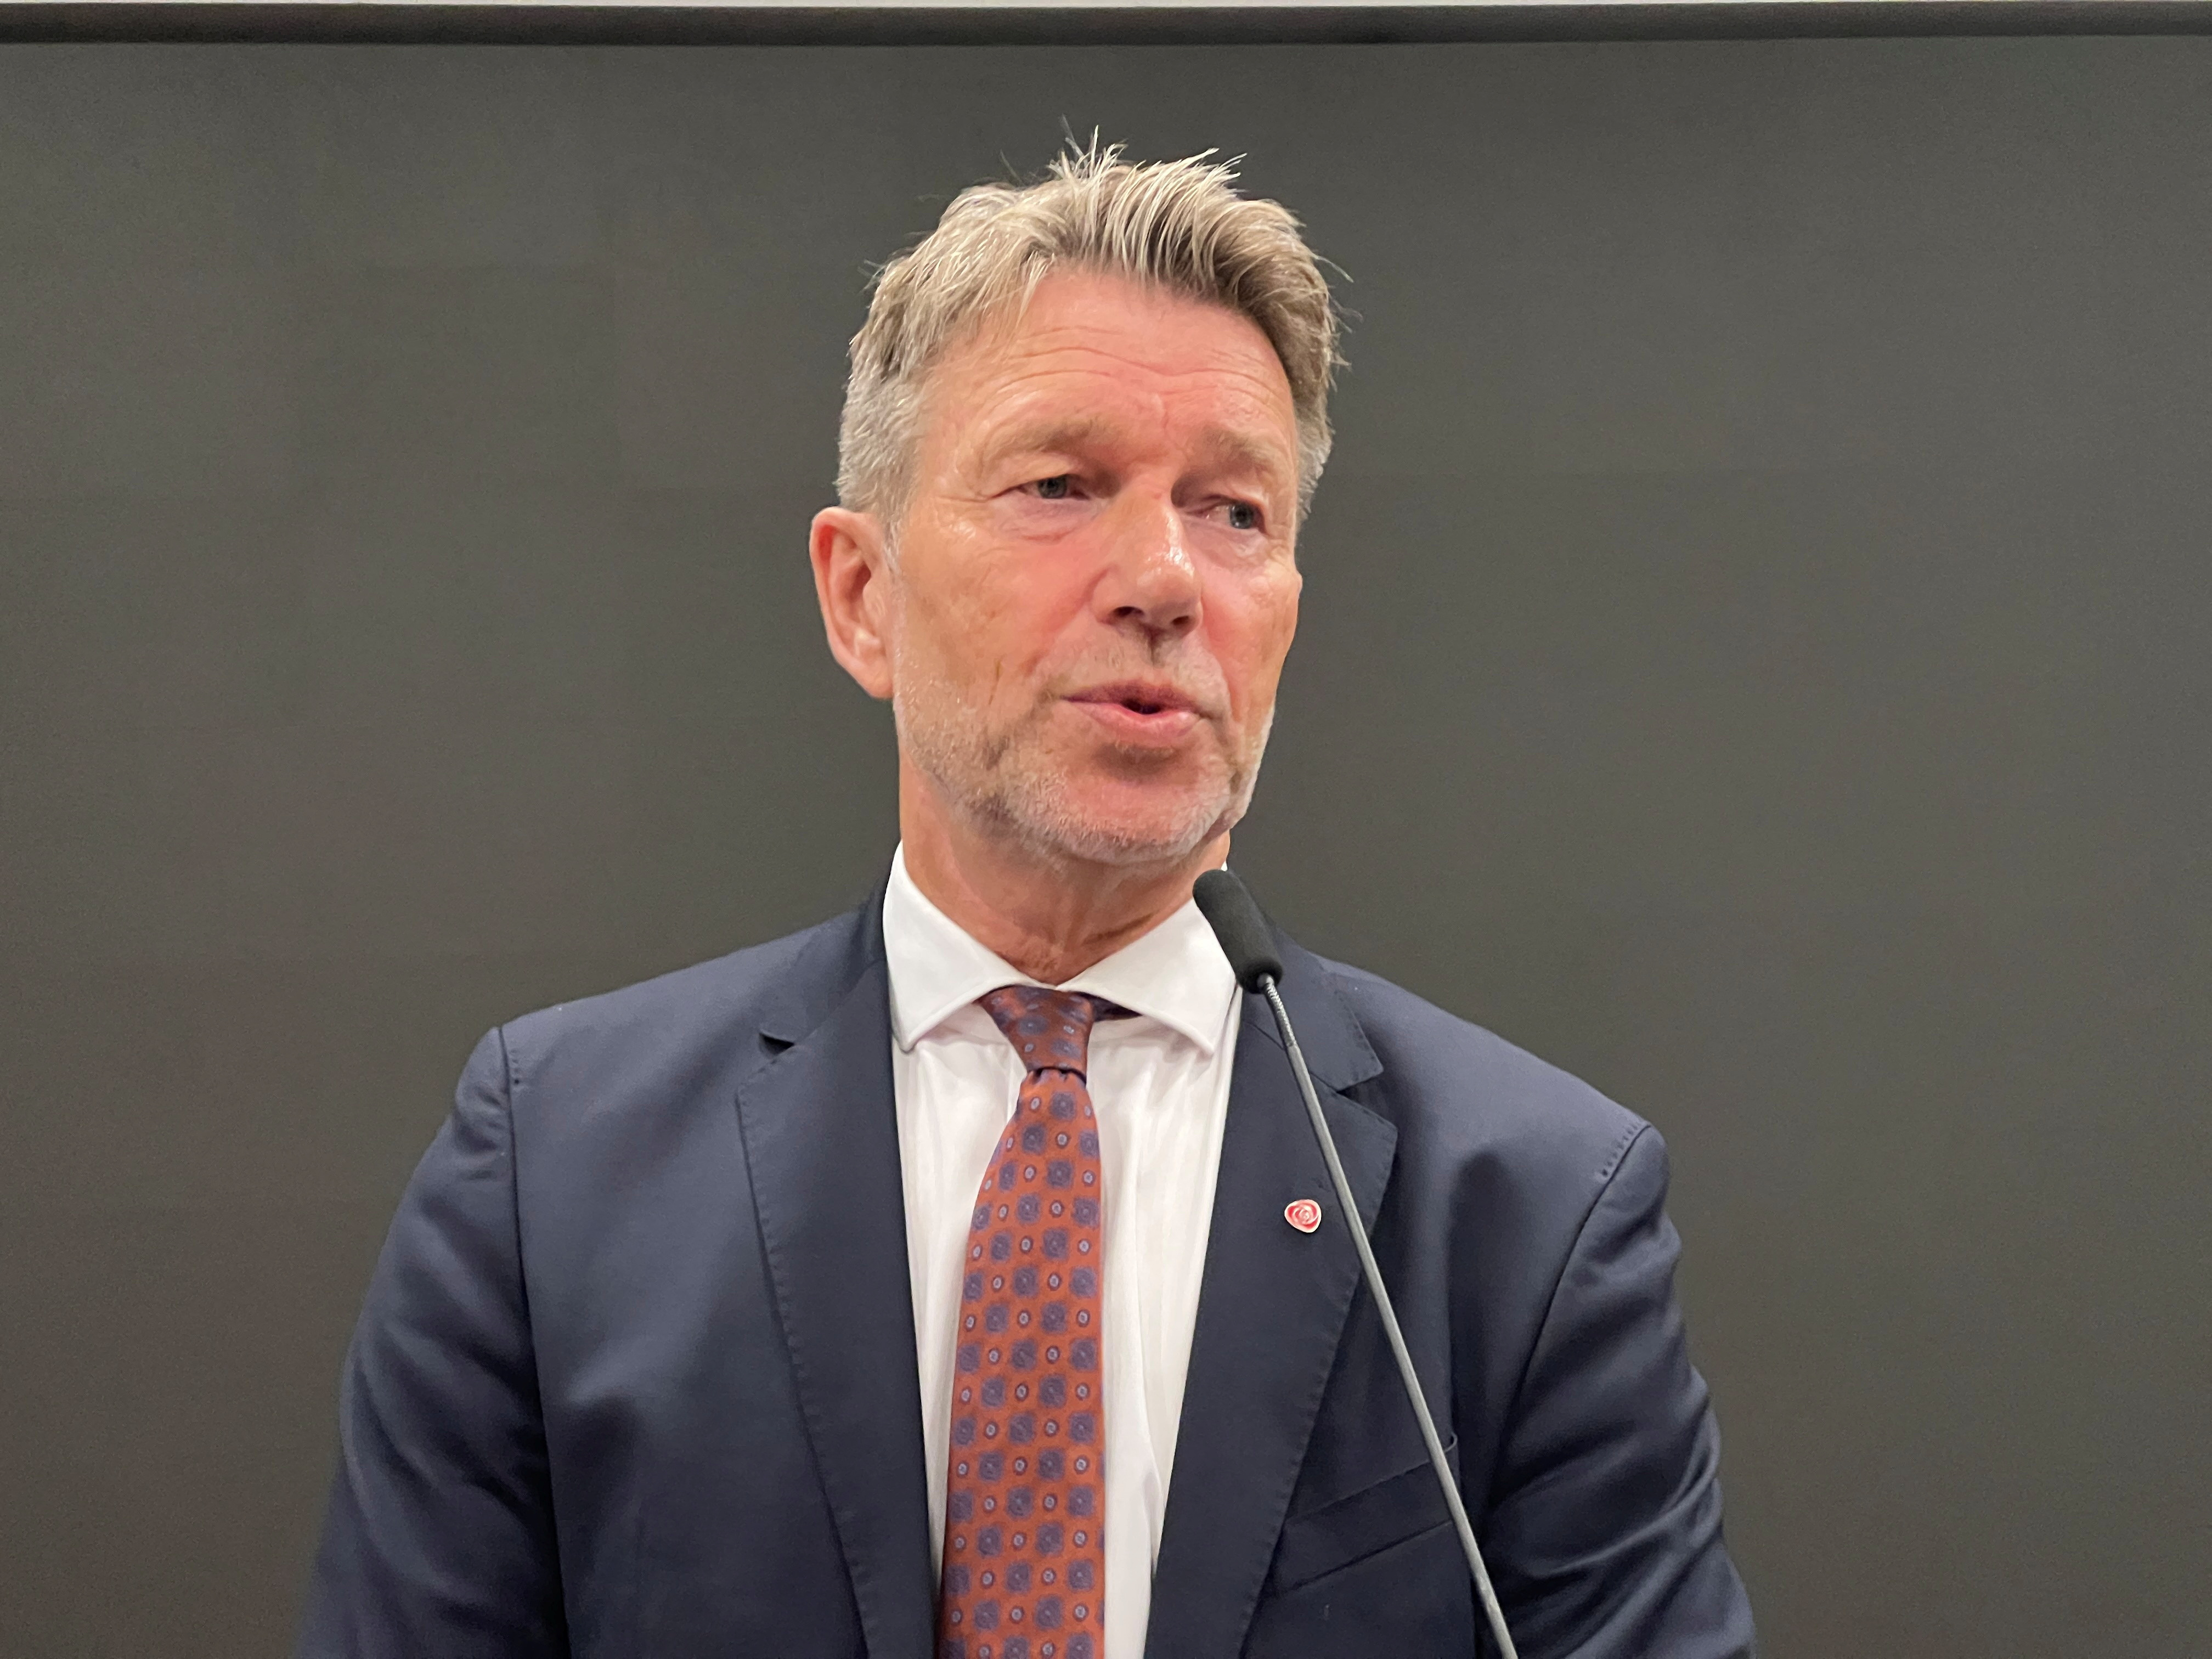 Norway's Oil and Energy Minister Terje Aasland talks to members of the media in Oslo